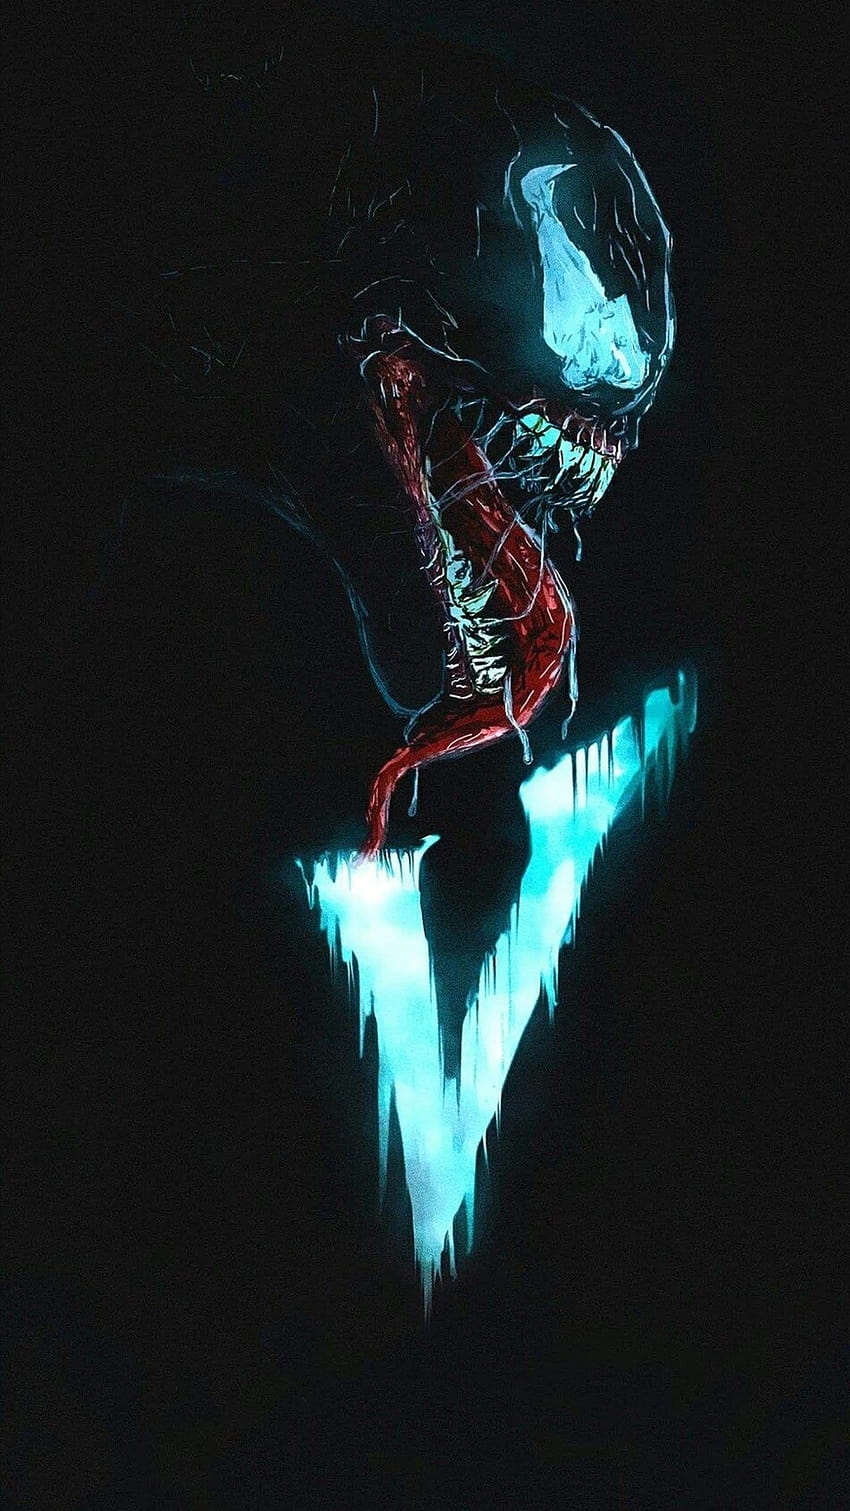 ♠️ Rony ♠️ Love Marvel? Check out our Sortable Avengers, venom amoled HD phone wallpaper